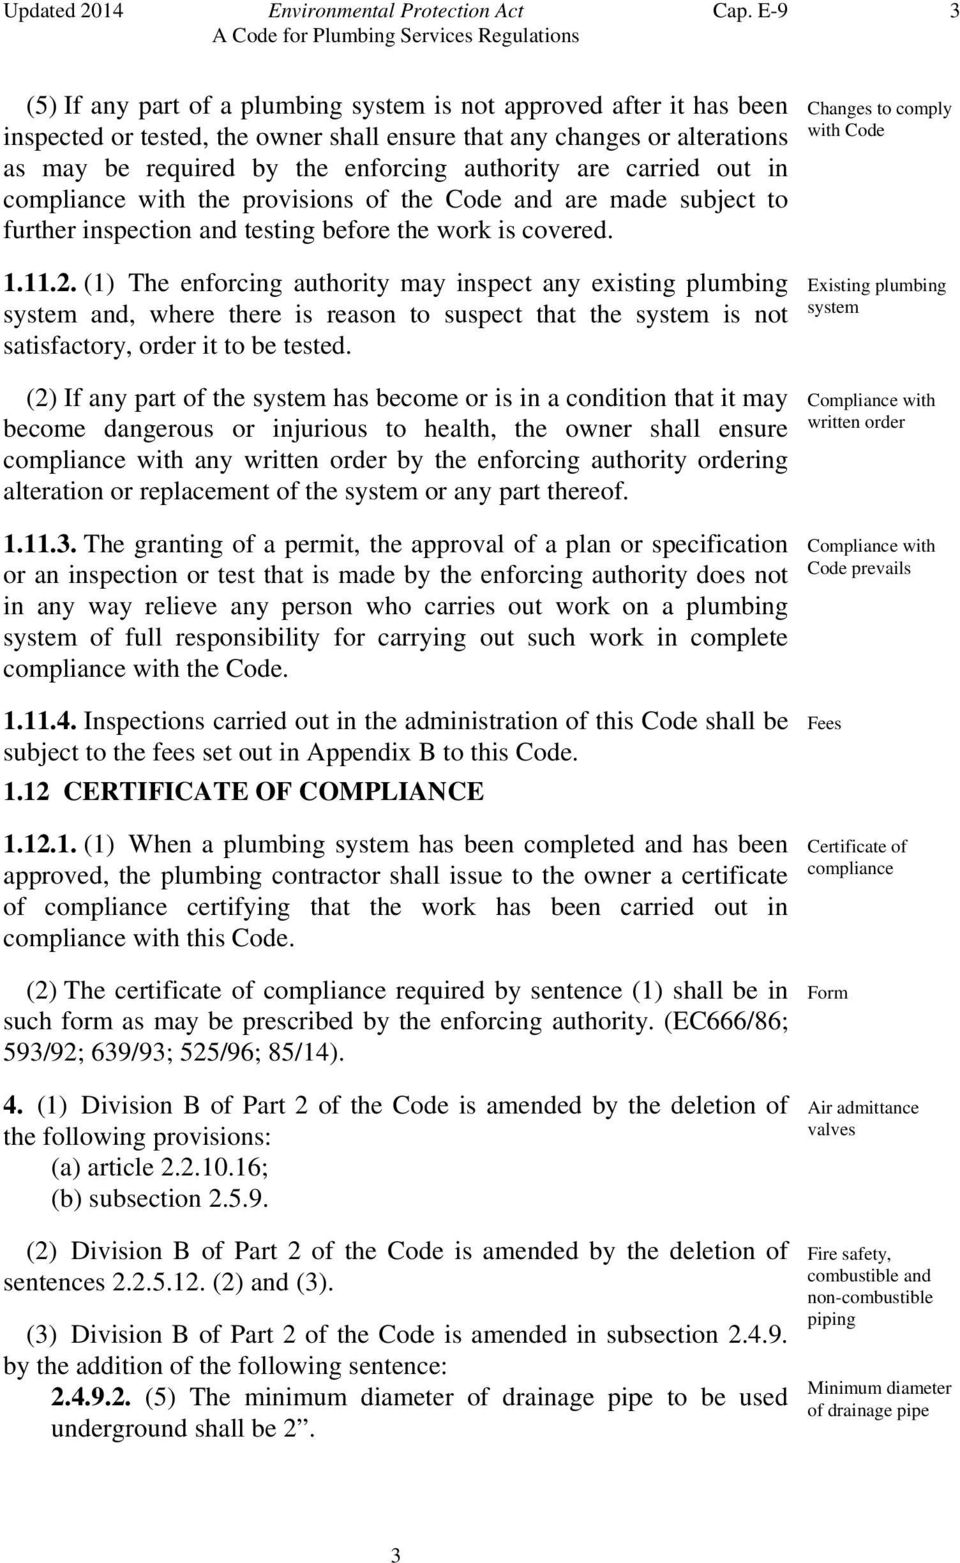 are carried out in compliance with the provisions of the Code and are made subject to further inspection and testing before the work is covered. 1.11.2.